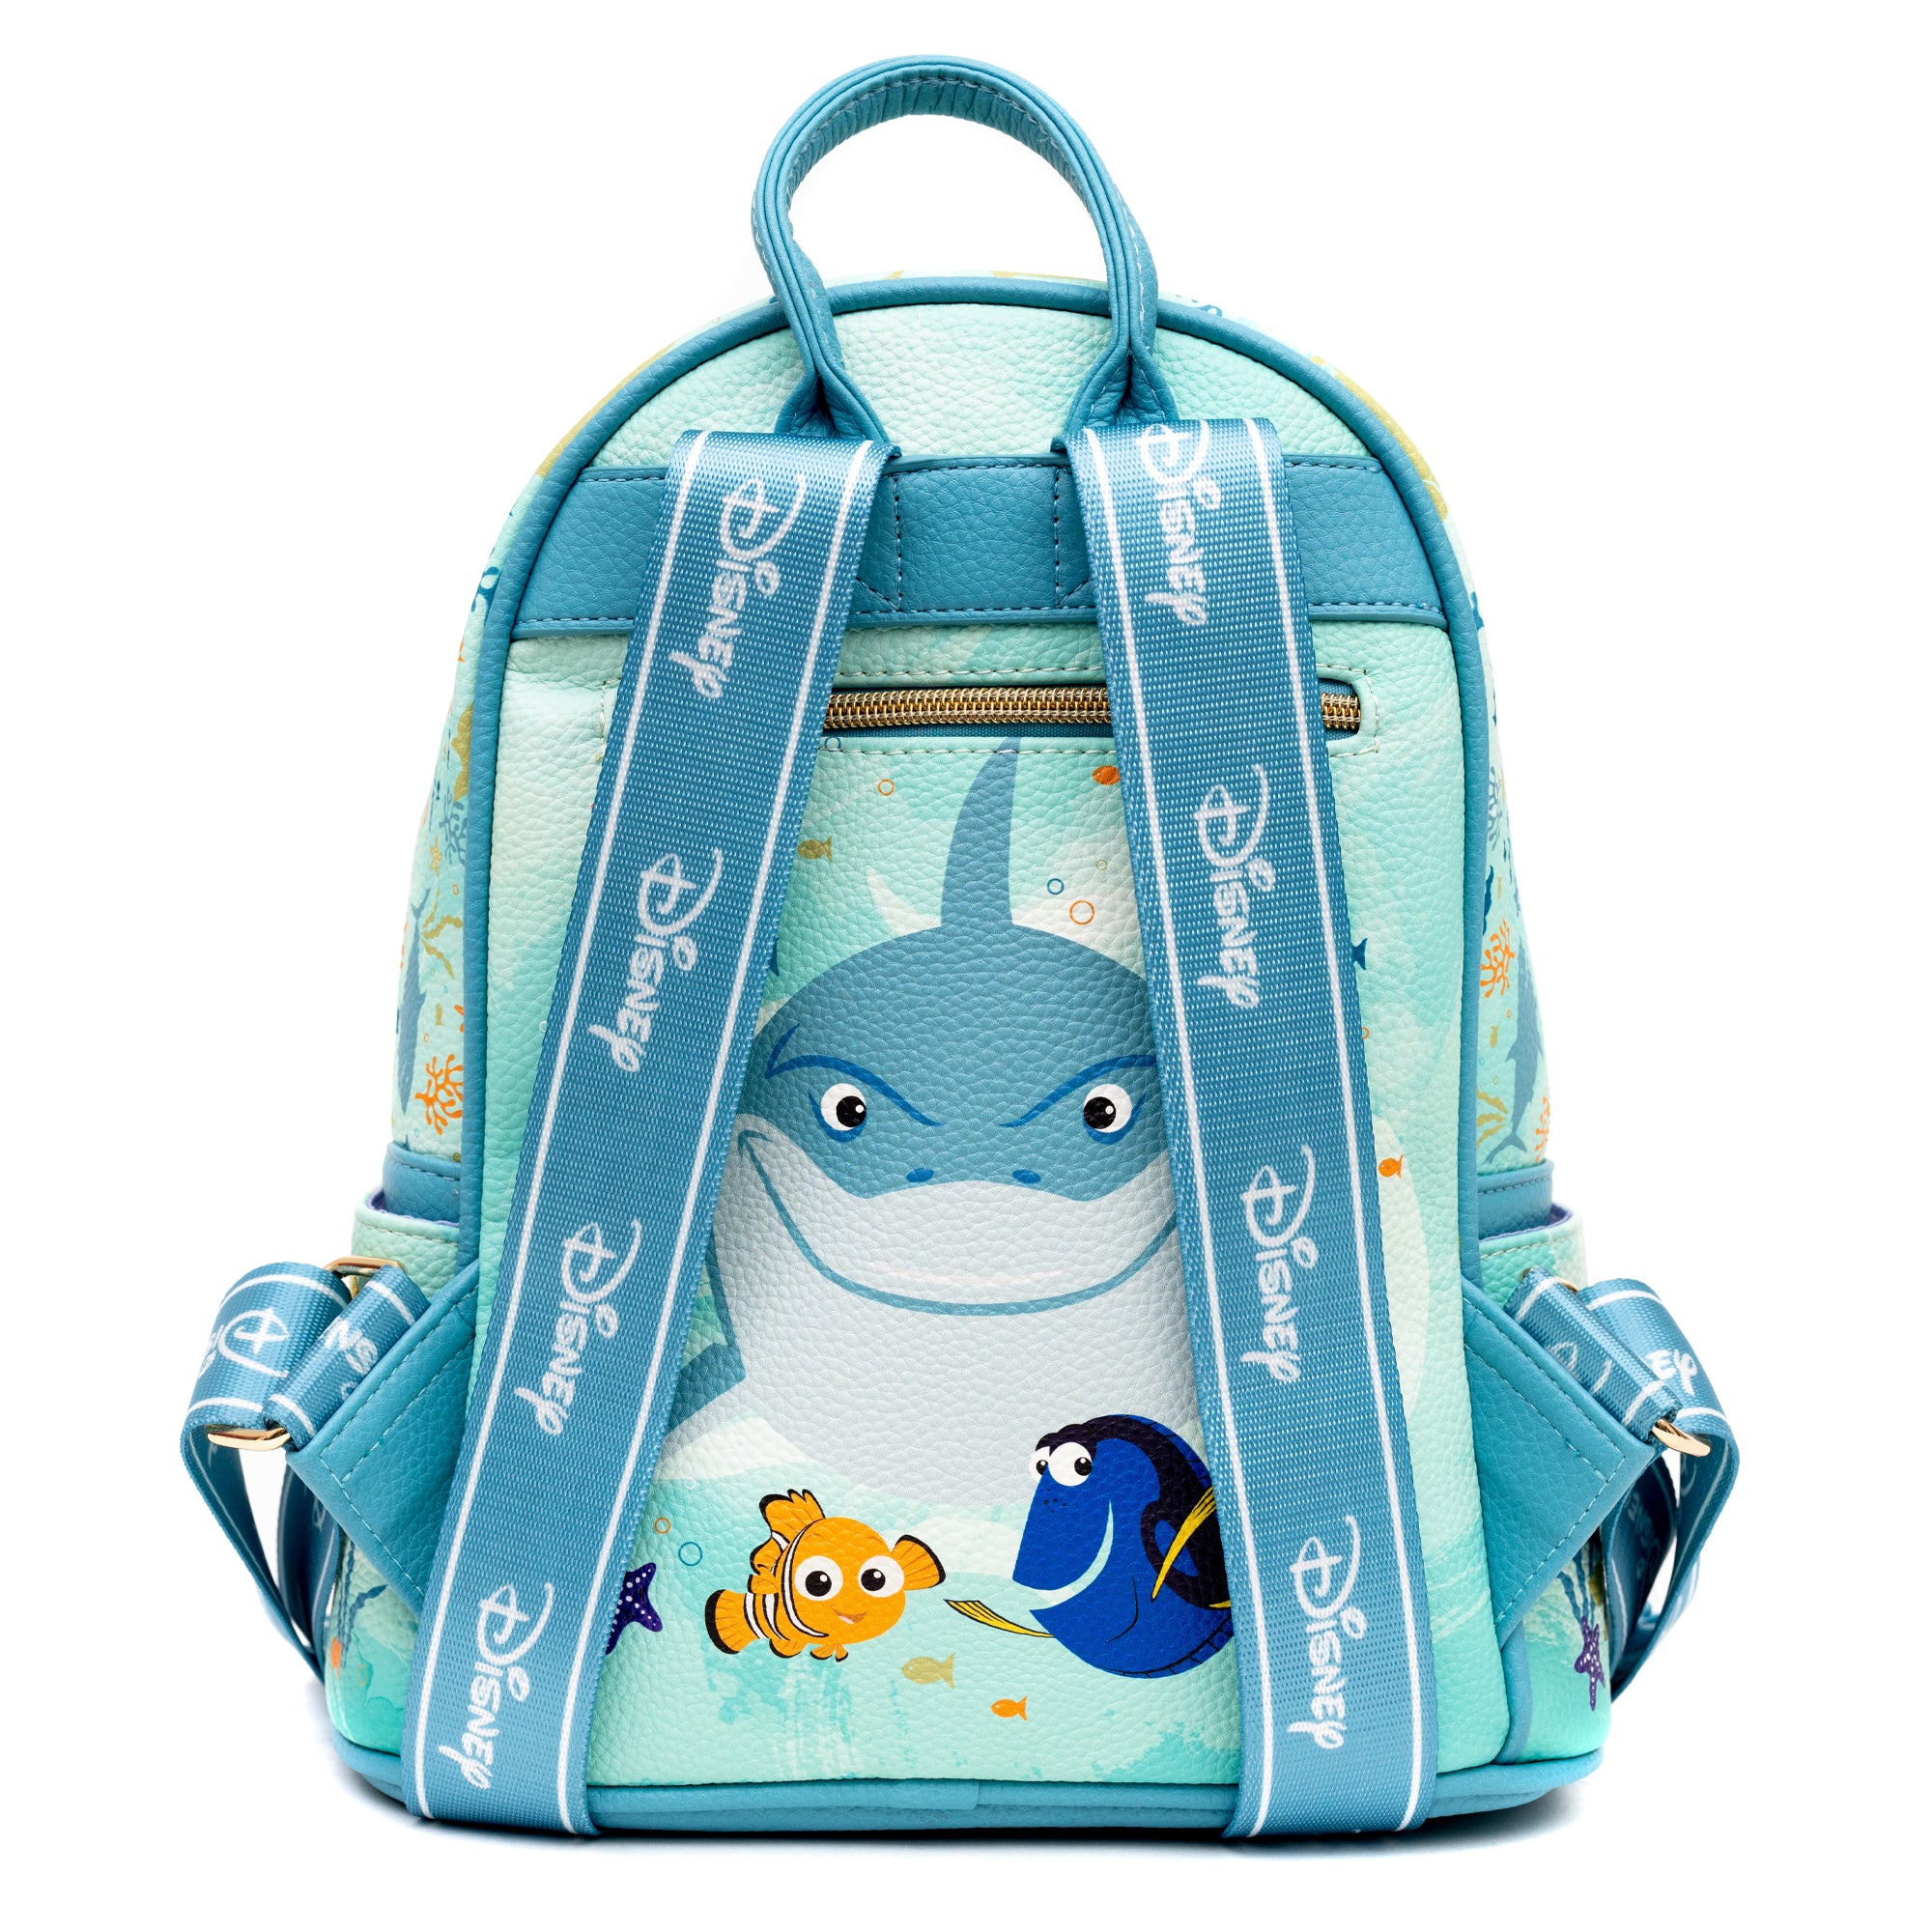 Disney Pixar Mini Backpack for Boys Girls Toddlers Kids ~ Premium 11 Backpack Bundle Featuring Toy Story, Disney Cars, Finding Nemo, Inside Out, and